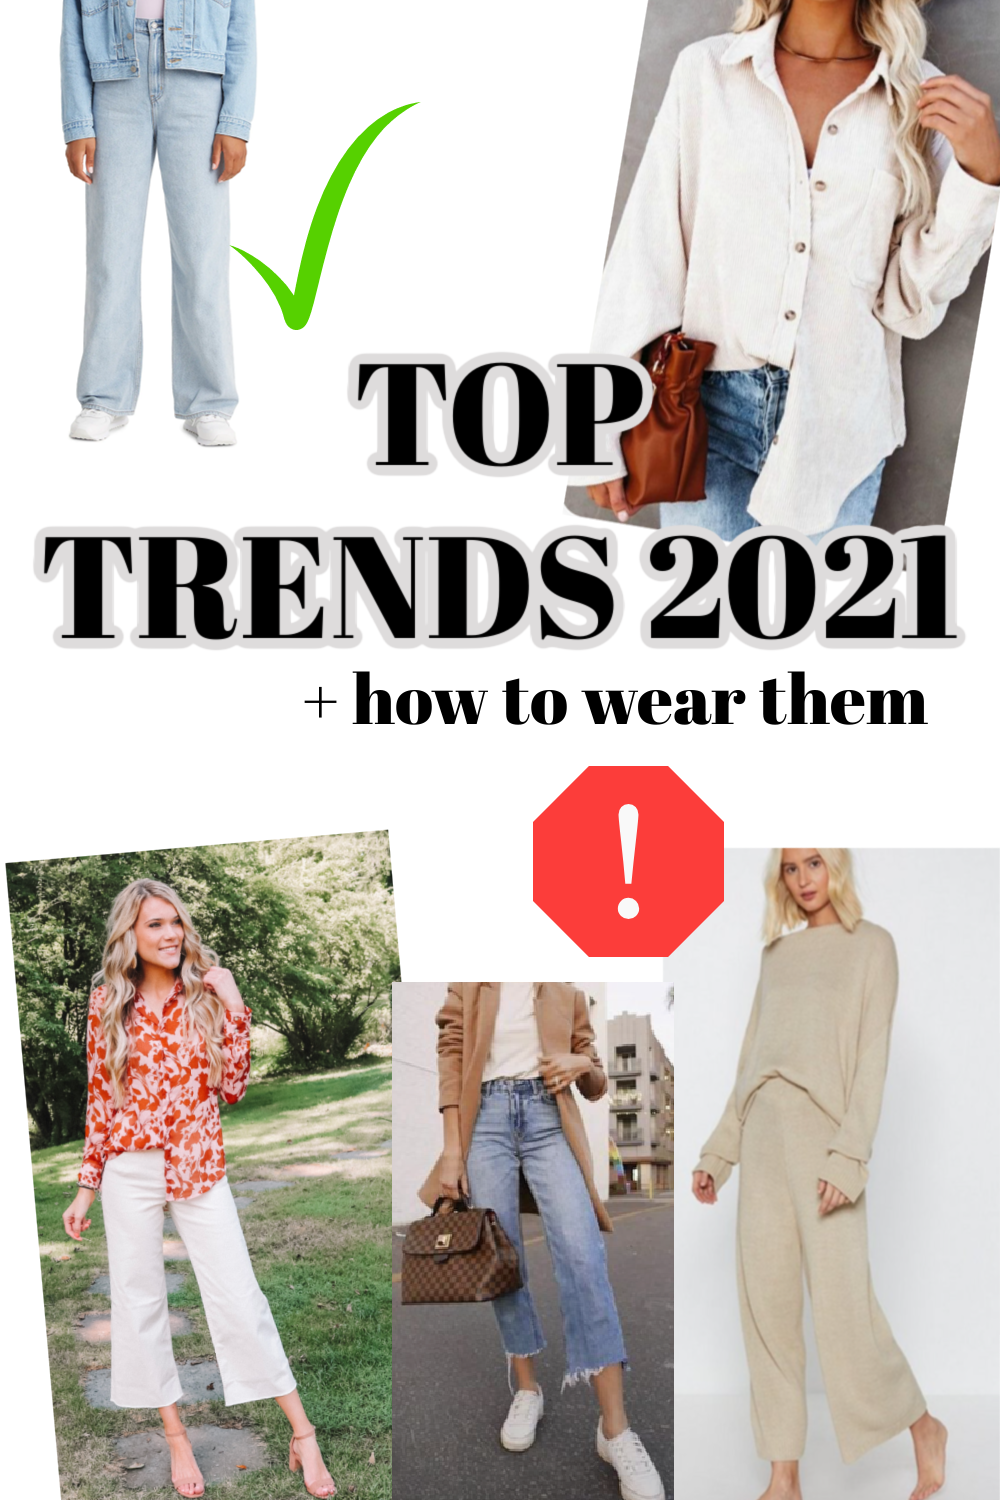 TOP TRENDS 2021- How to Wear Them! - byalainanicole